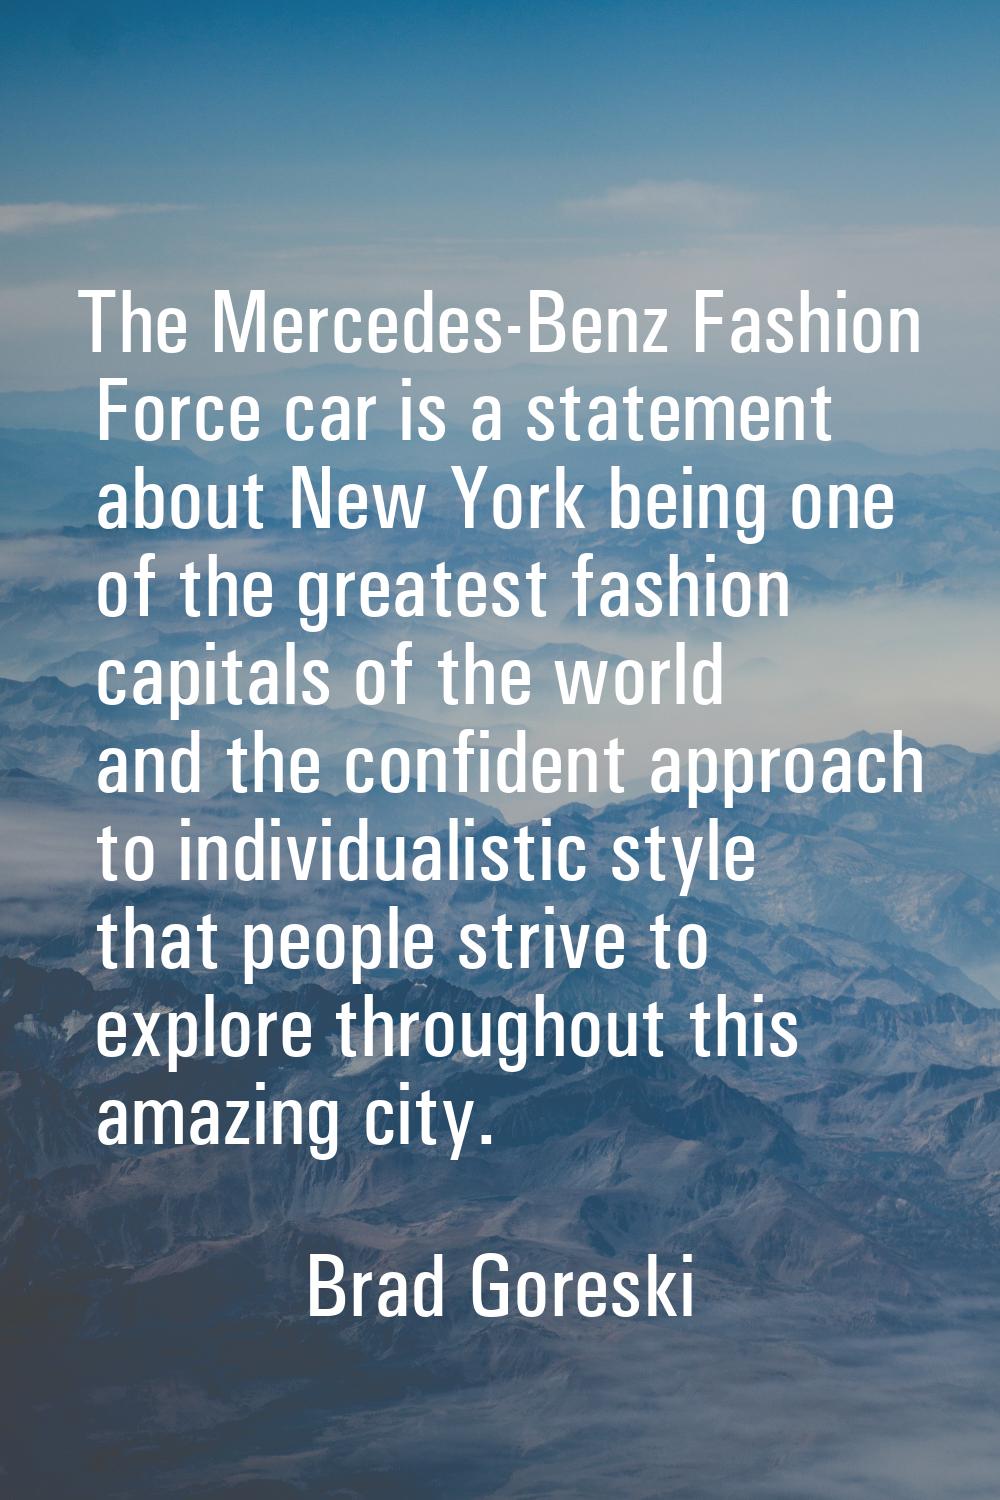 The Mercedes-Benz Fashion Force car is a statement about New York being one of the greatest fashion